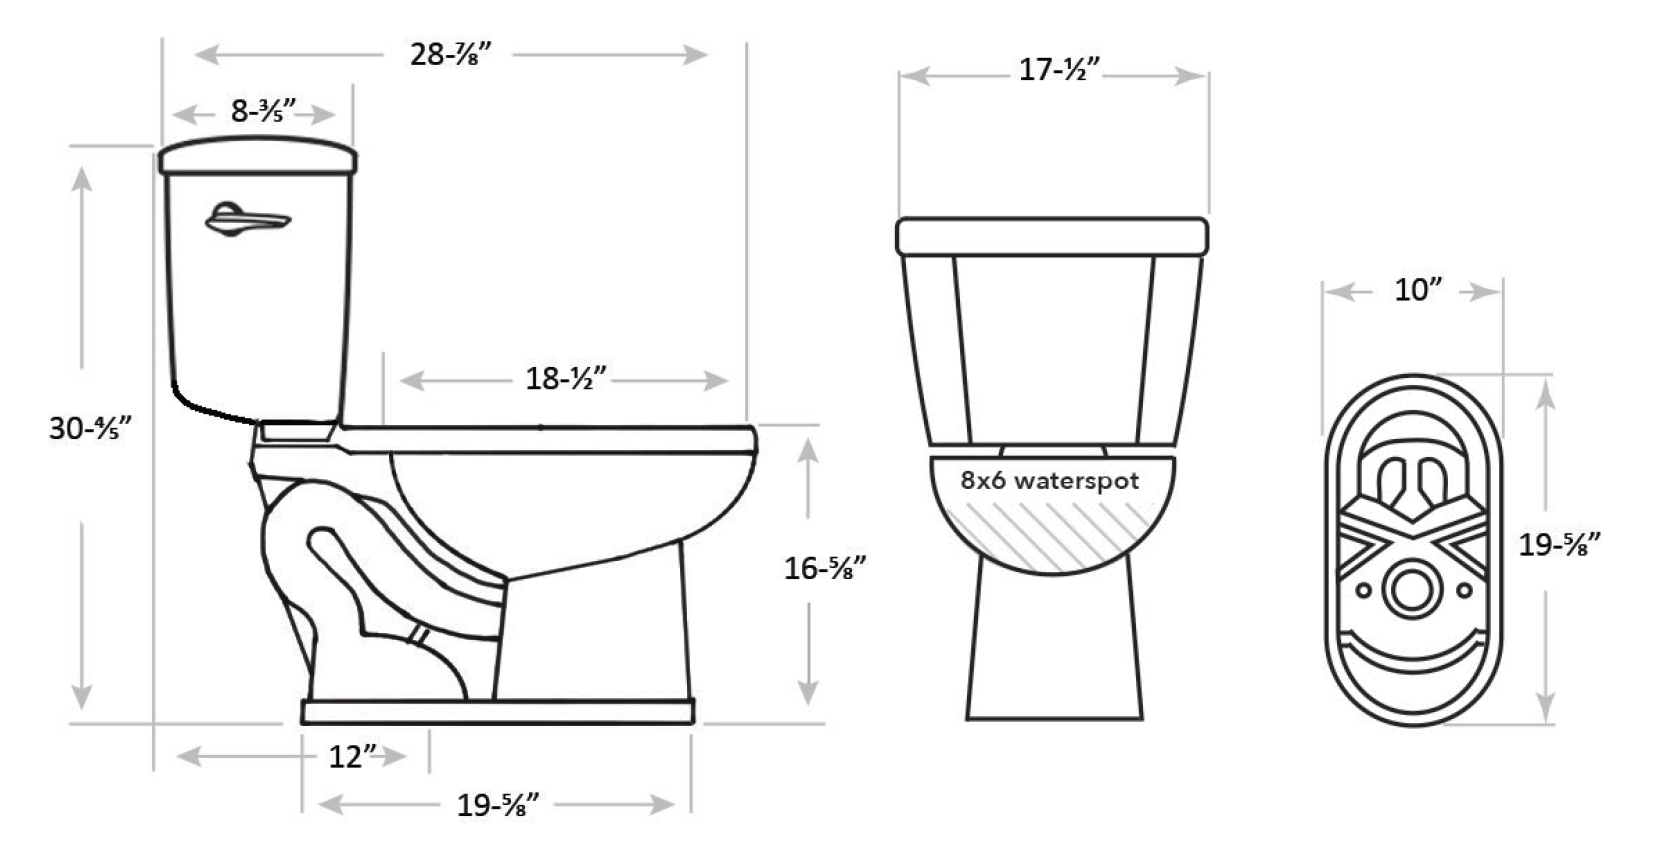 LIBERTY 12" Rough-In Elongated ADA Toilet technical info